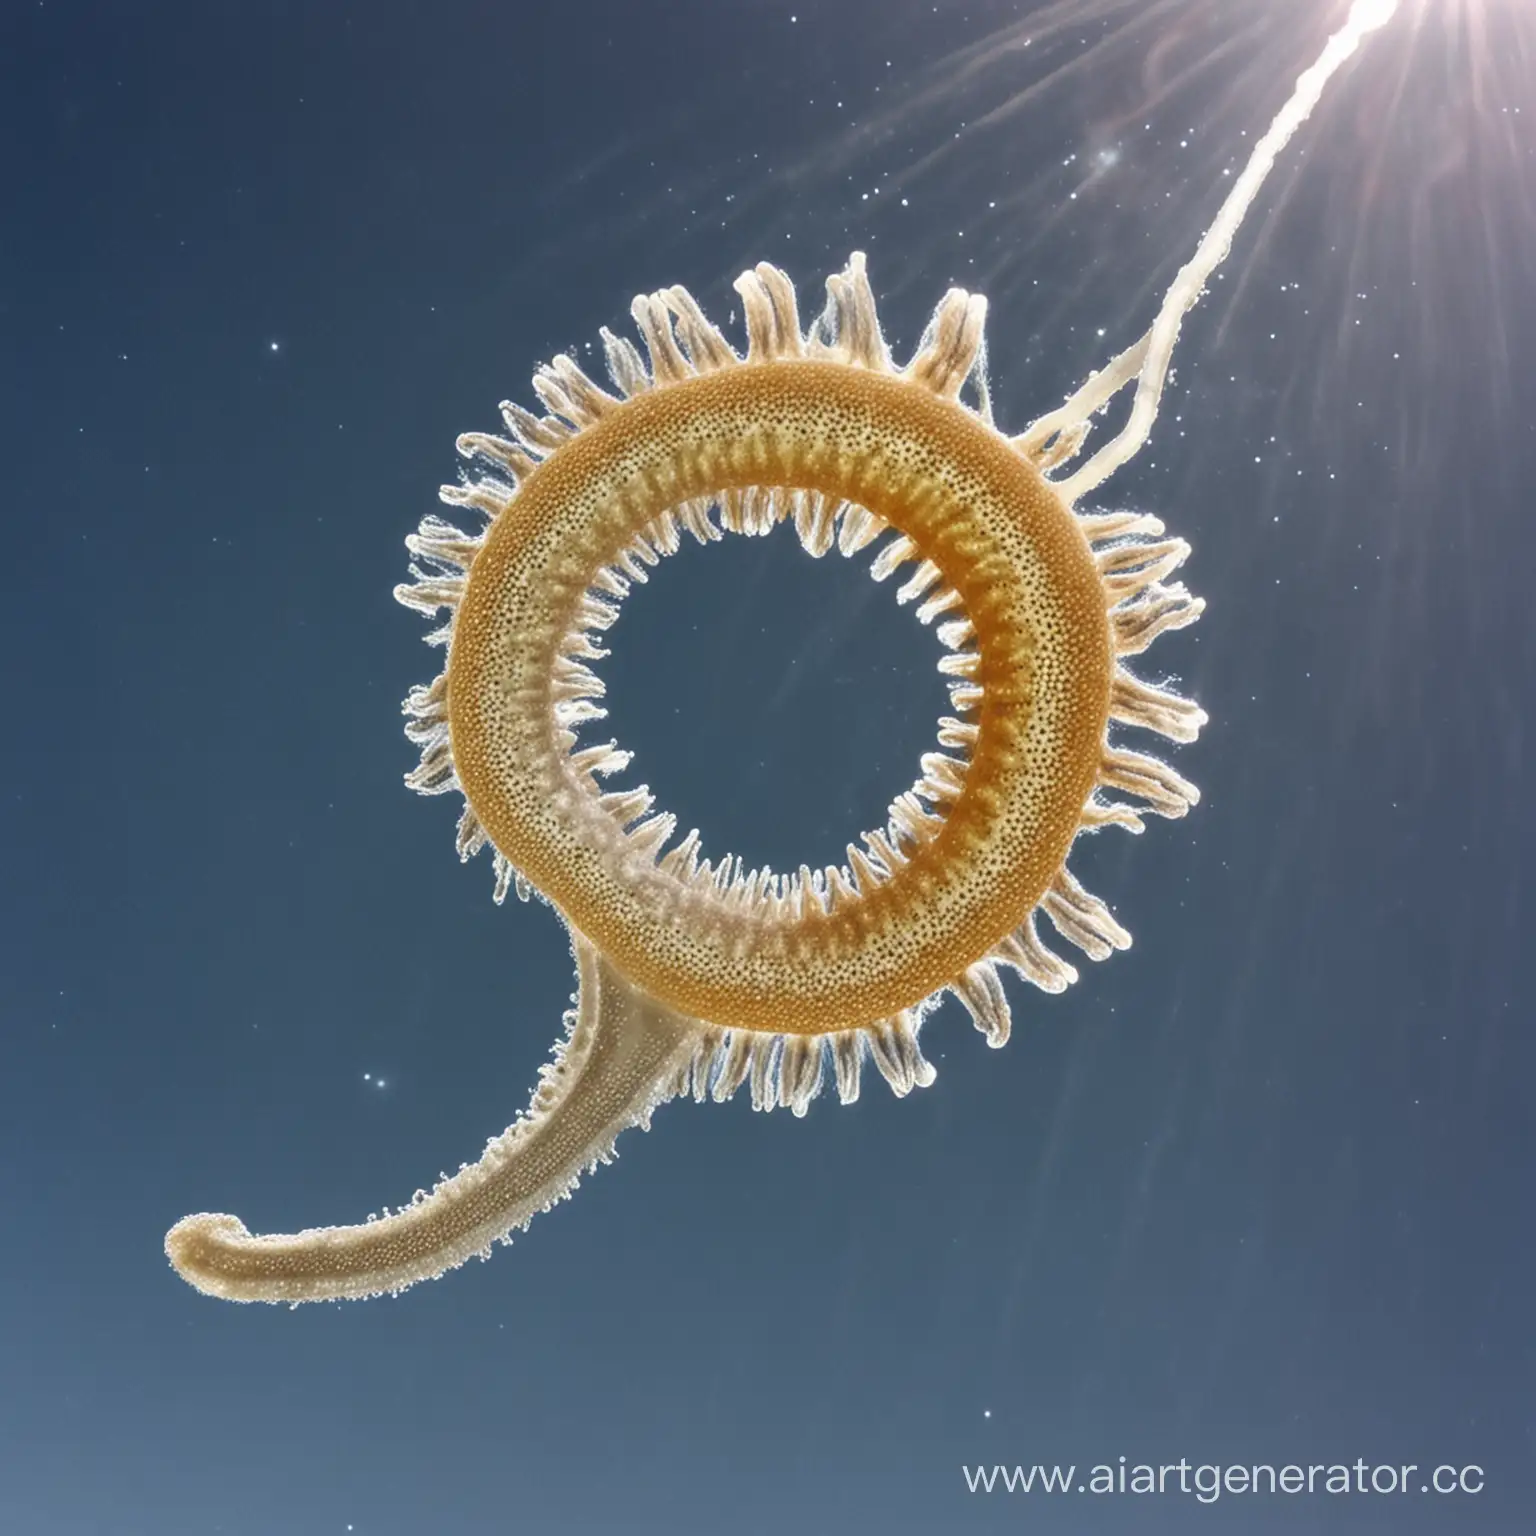 Cheerful-Planaria-Worms-Floating-in-a-Bright-Sky